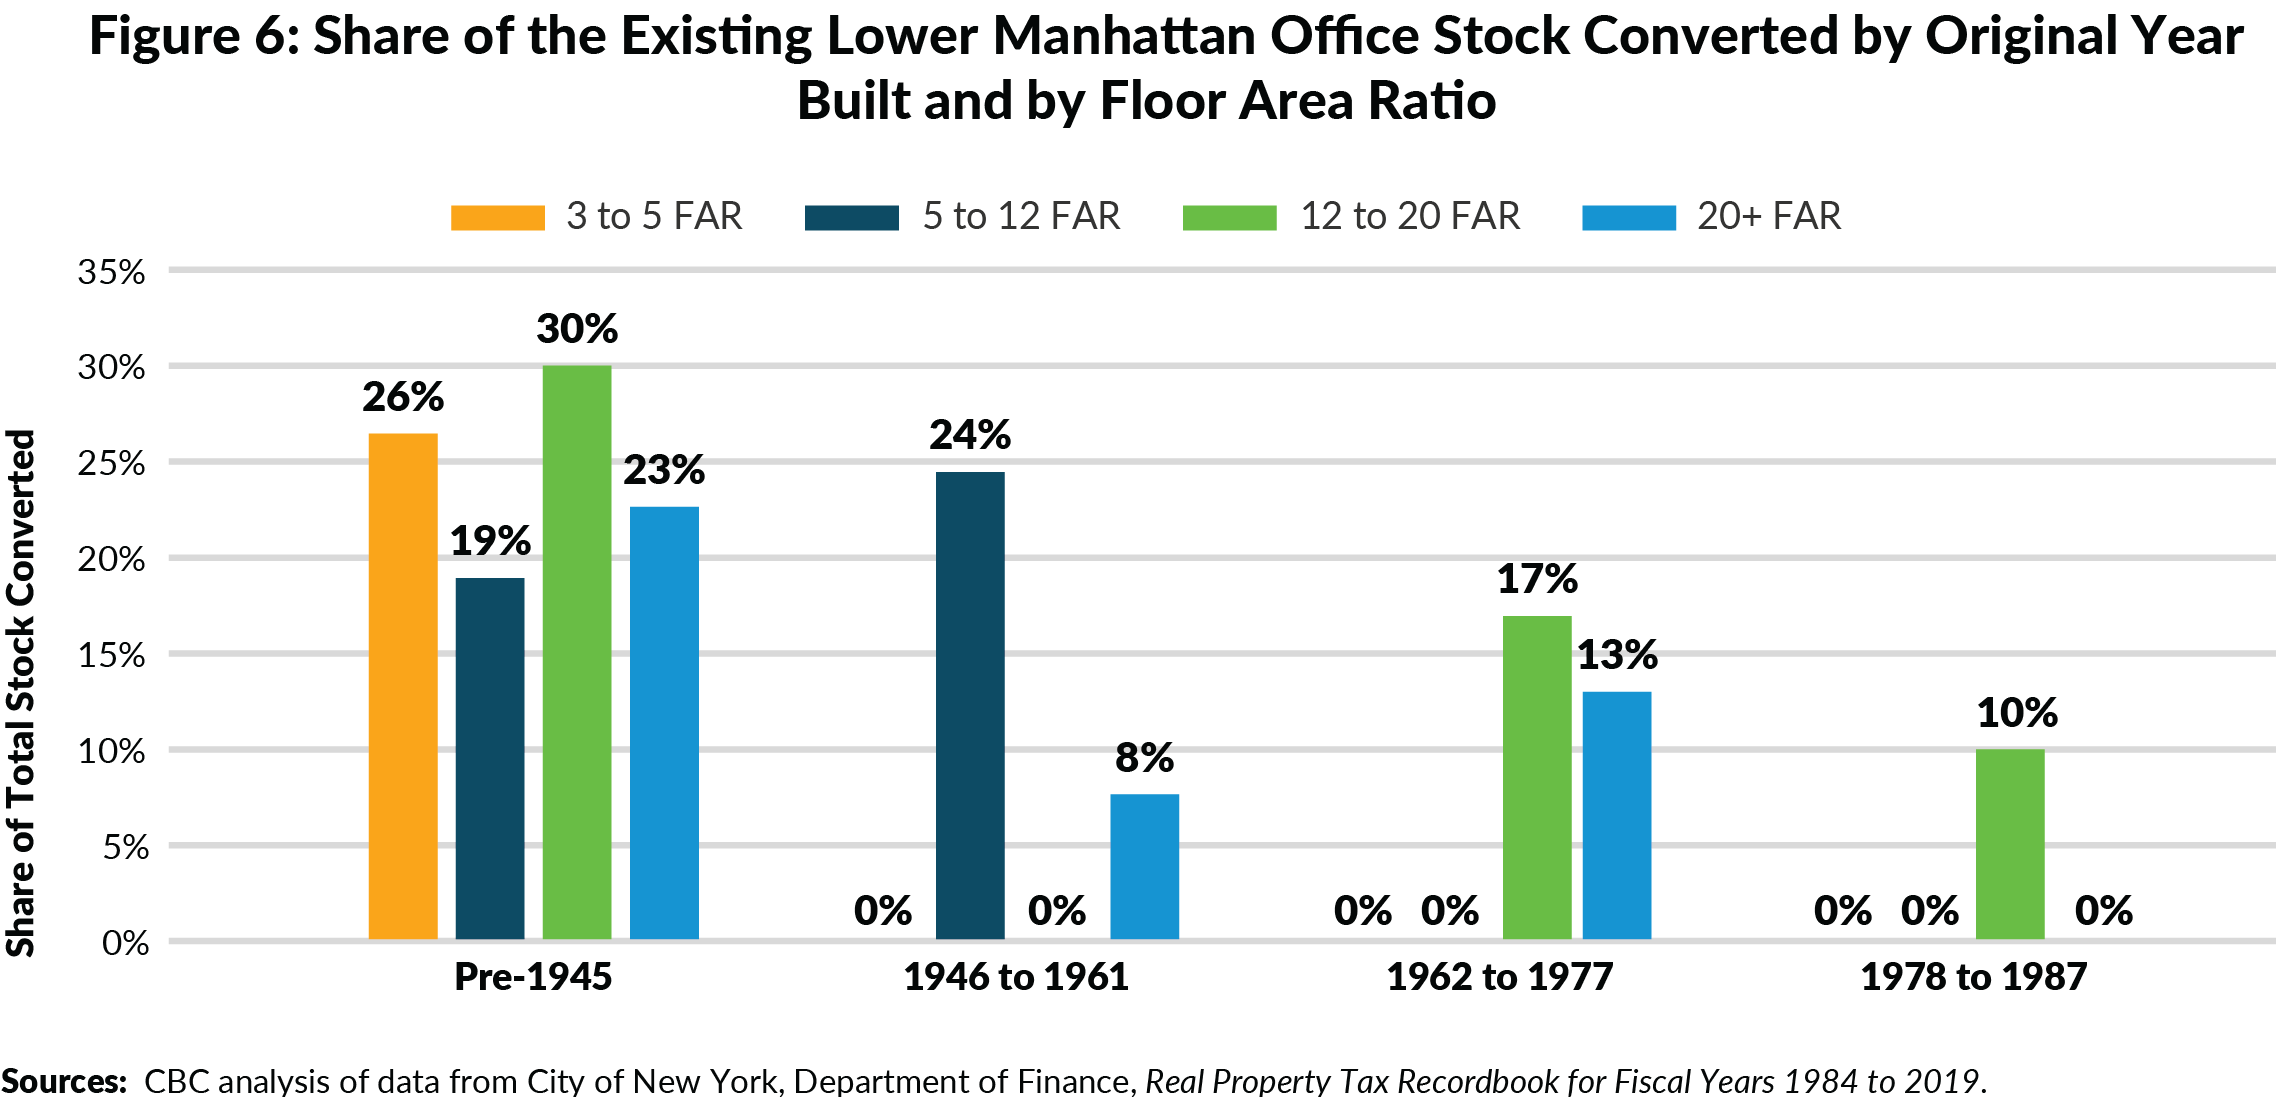 Figure 6. Share of the Existing Lower Manhattan Office Stock Converted by Original Year Built and by Floor Area Ratio